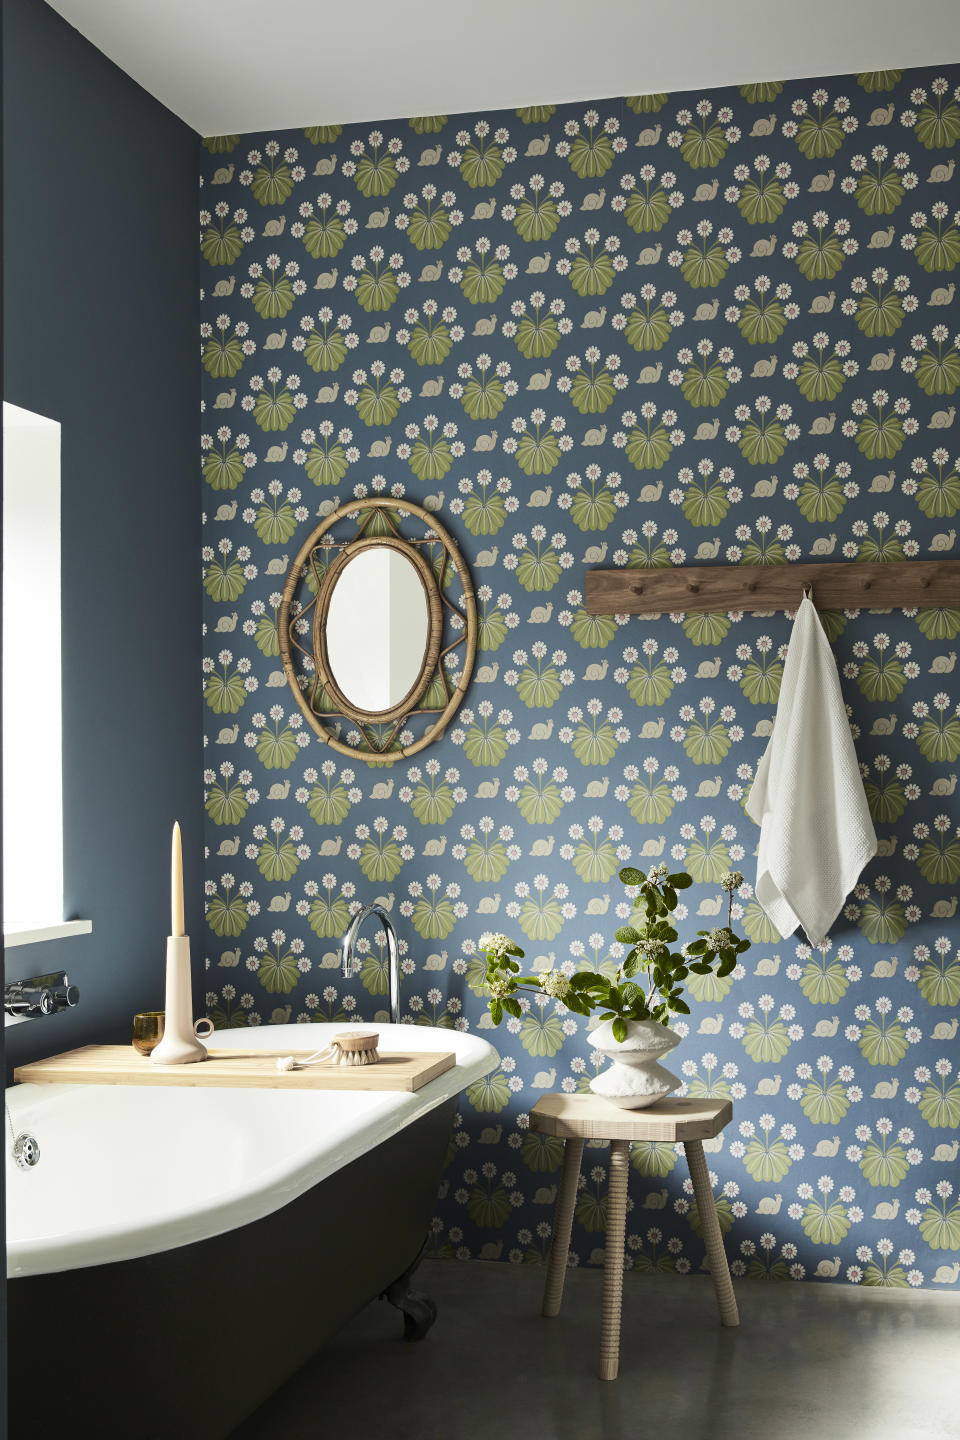 <p> If you&apos;re considering bathroom color schemes that are practical but pretty, sometimes, dark bathrooms are often a great way to go &#x2013; they will disguise splashes and marks more easily, and make even the most functional of spaces feel curated. We love this wallpaper by Little Greene &#x2013; ensure any wallpaper you use is water resistant, and if not, consider protecting it with a coat of decorator&apos;s varnish. </p>